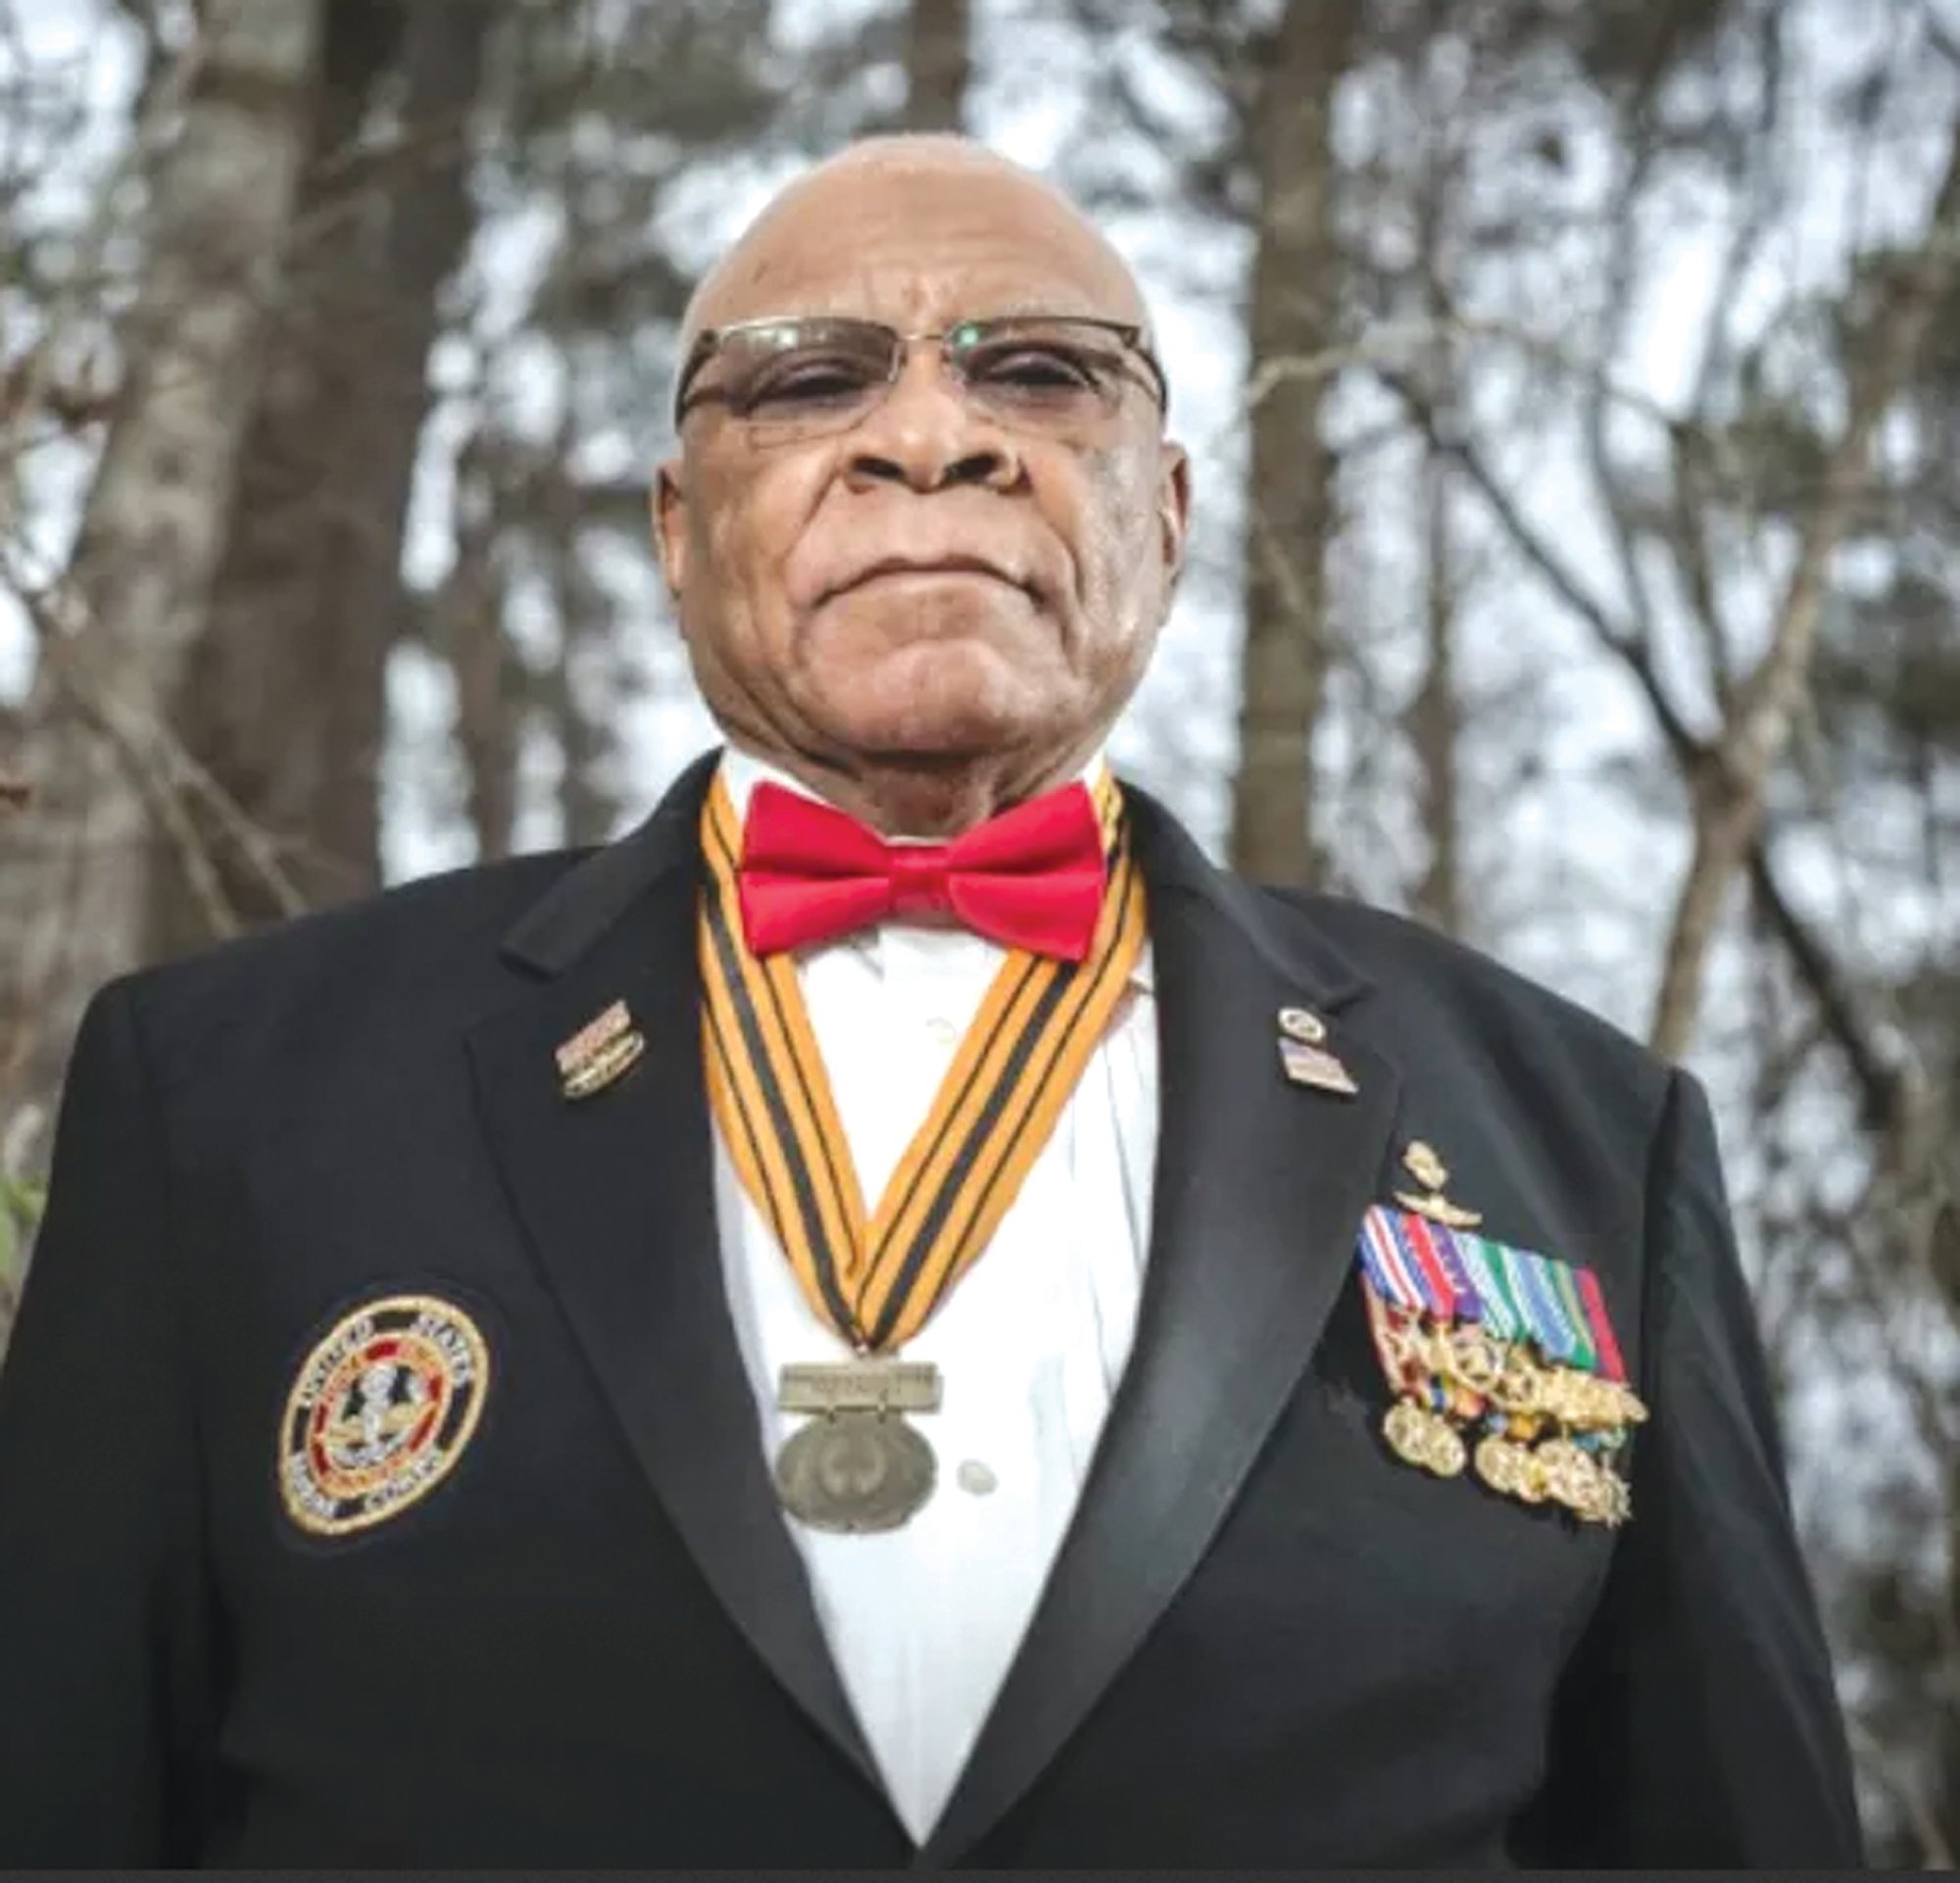 PHOTO PROVIDED
James Capers Jr. wears the Commando Hall of Fame Medal.